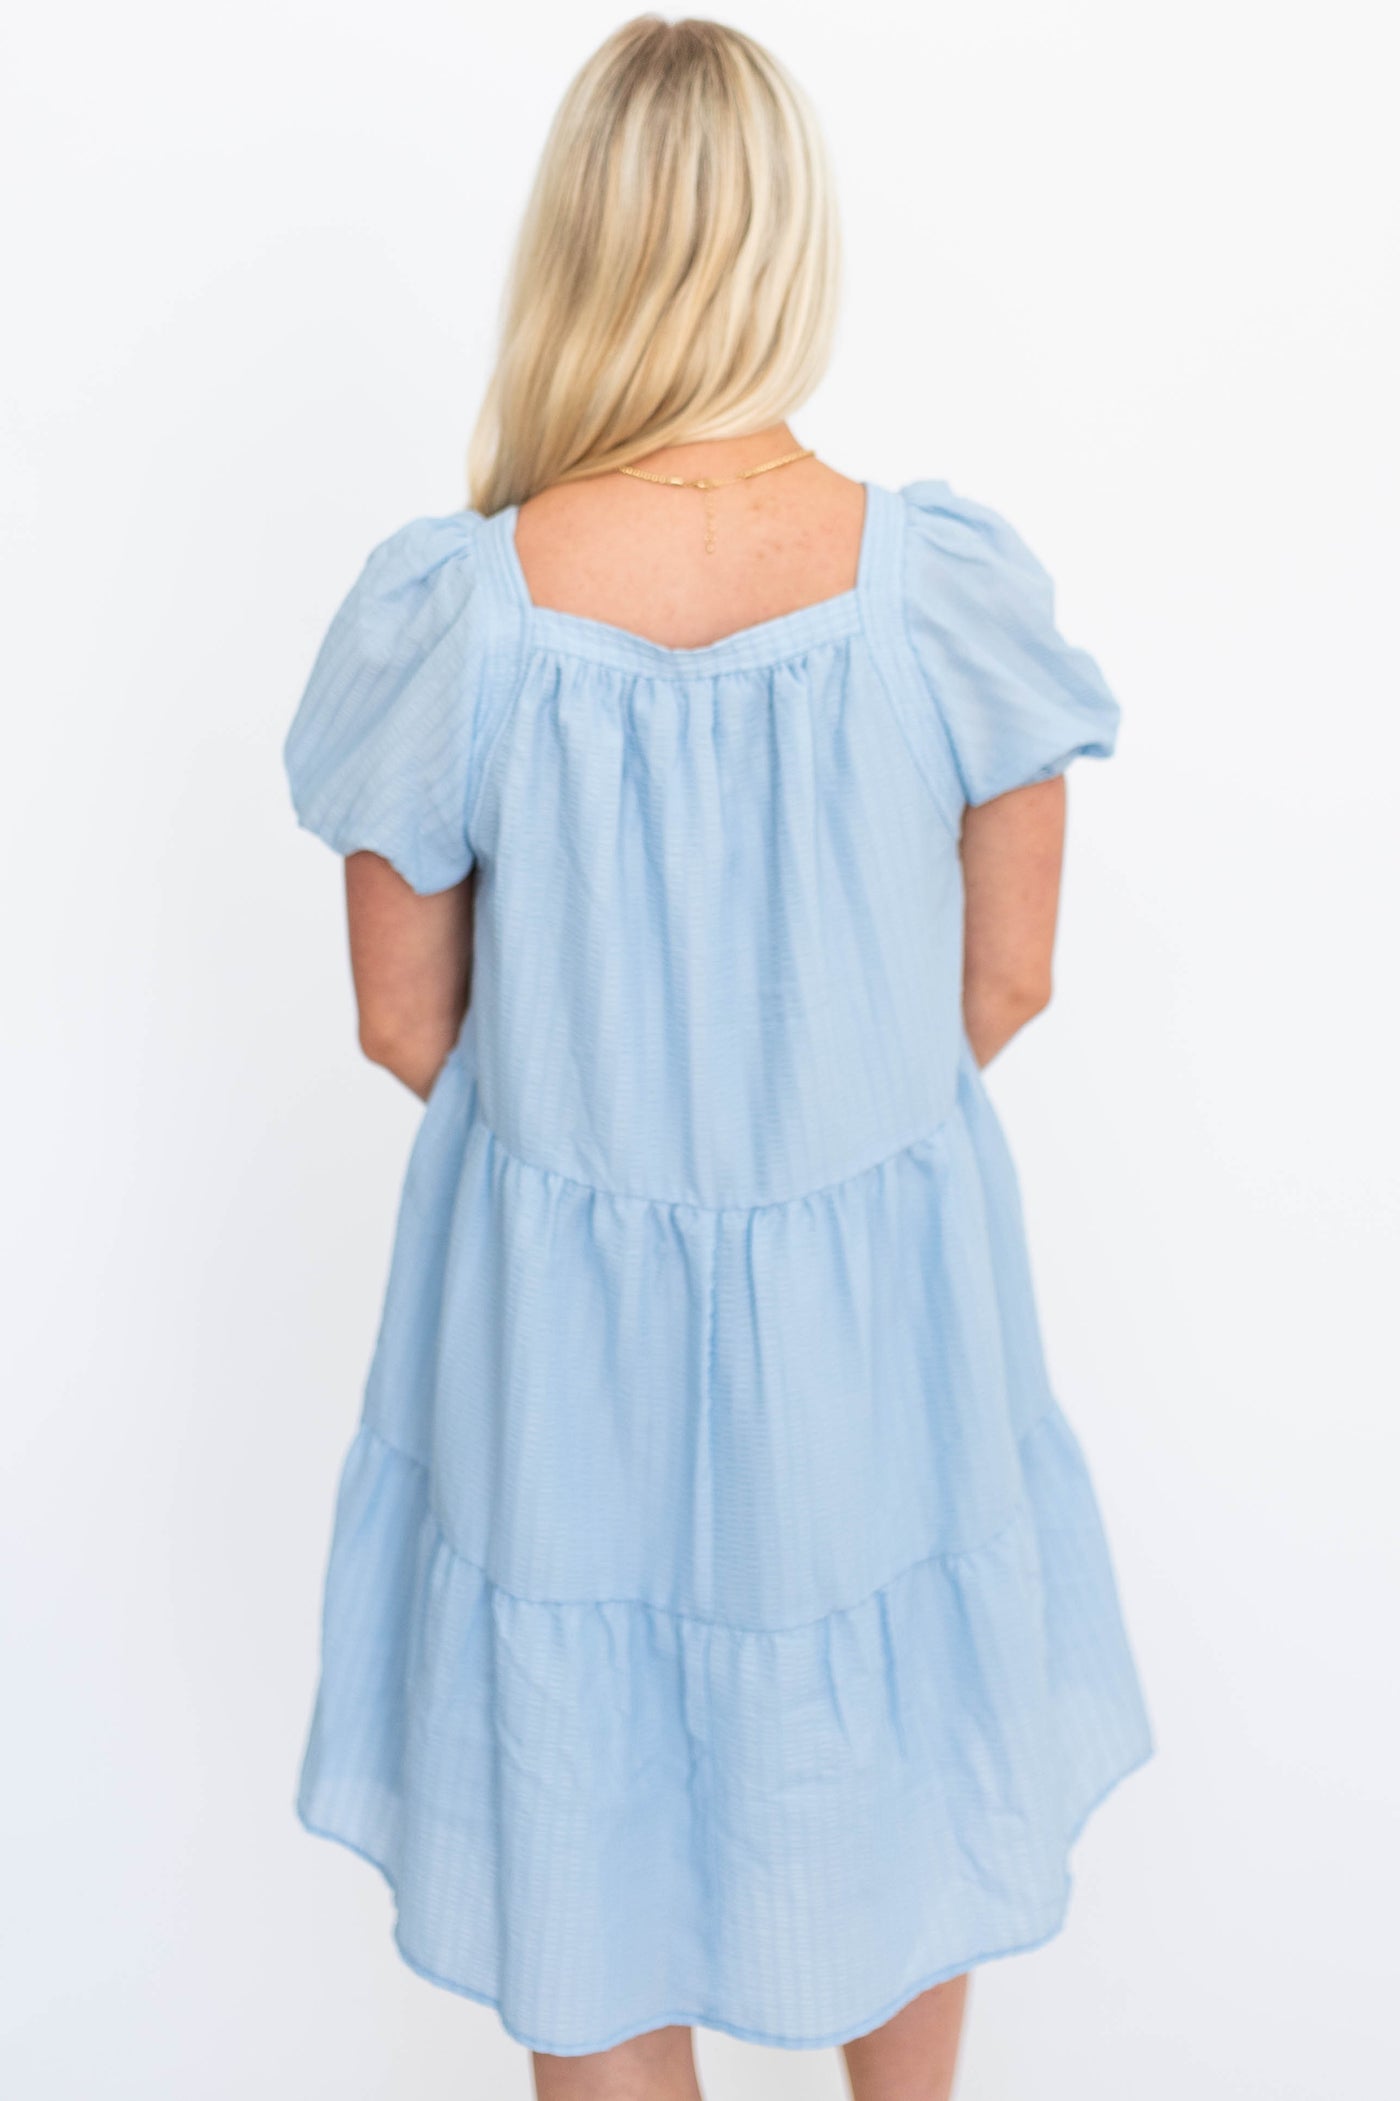 Back view of a small light blue dress